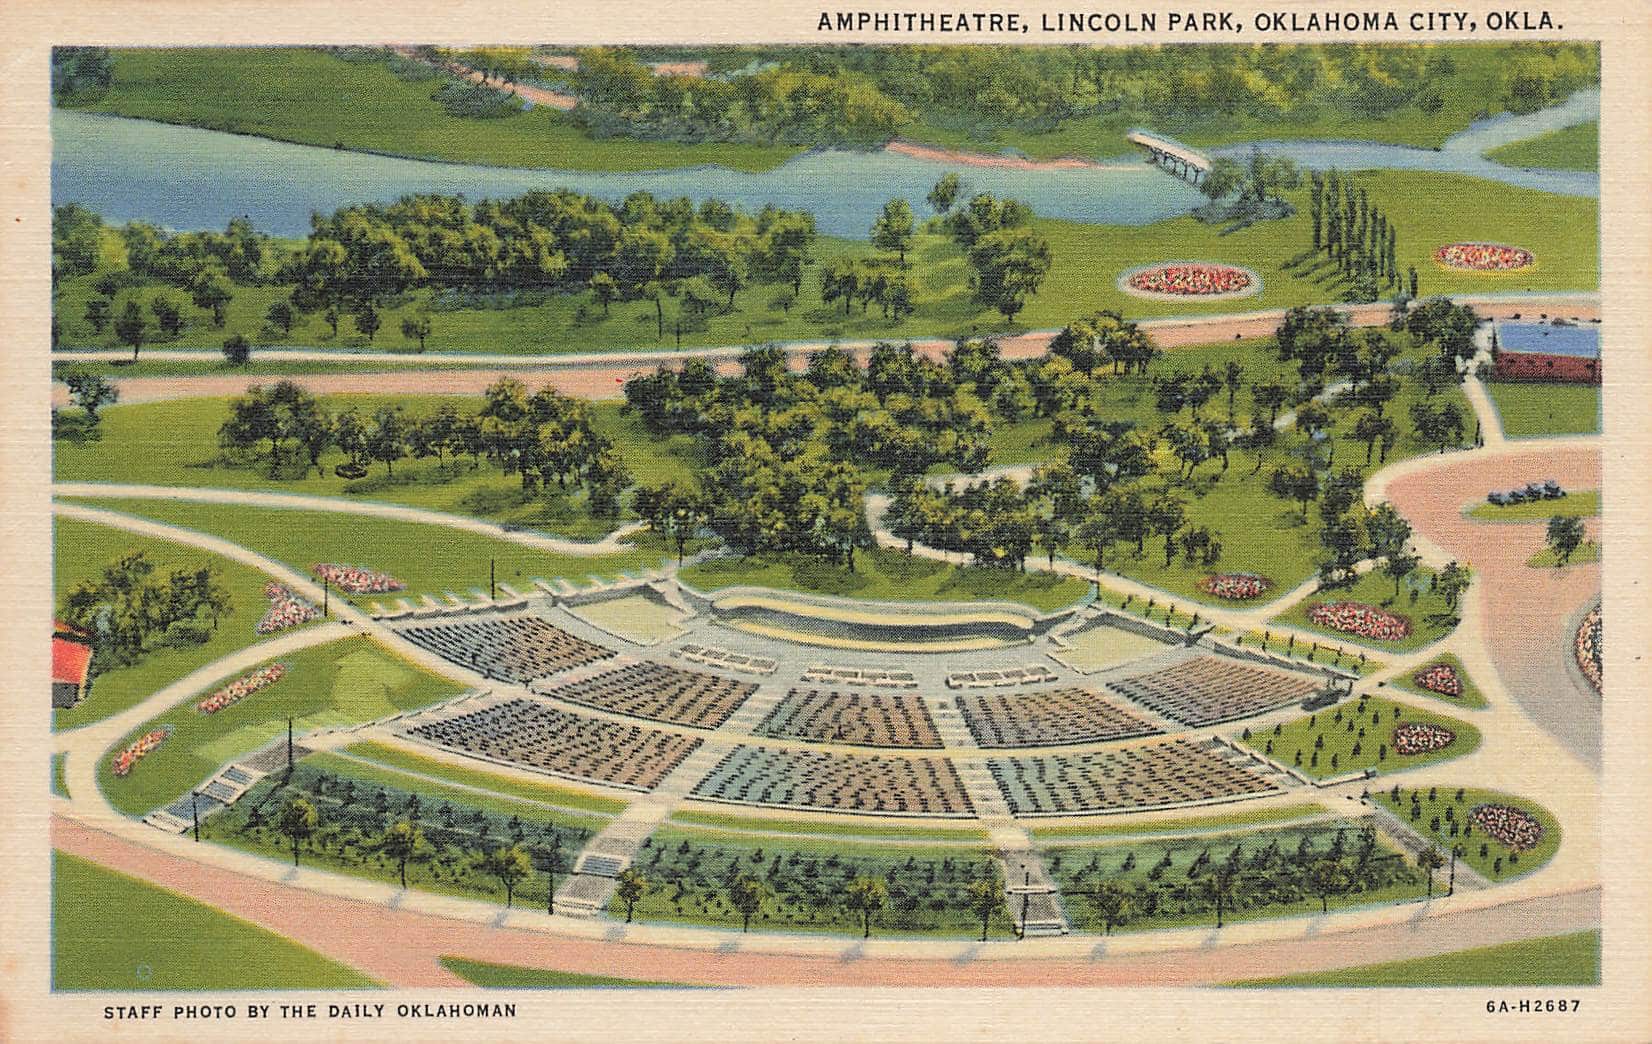 A vintage postcard shows a view of the Oklahoma City Zoo Amphitheater.